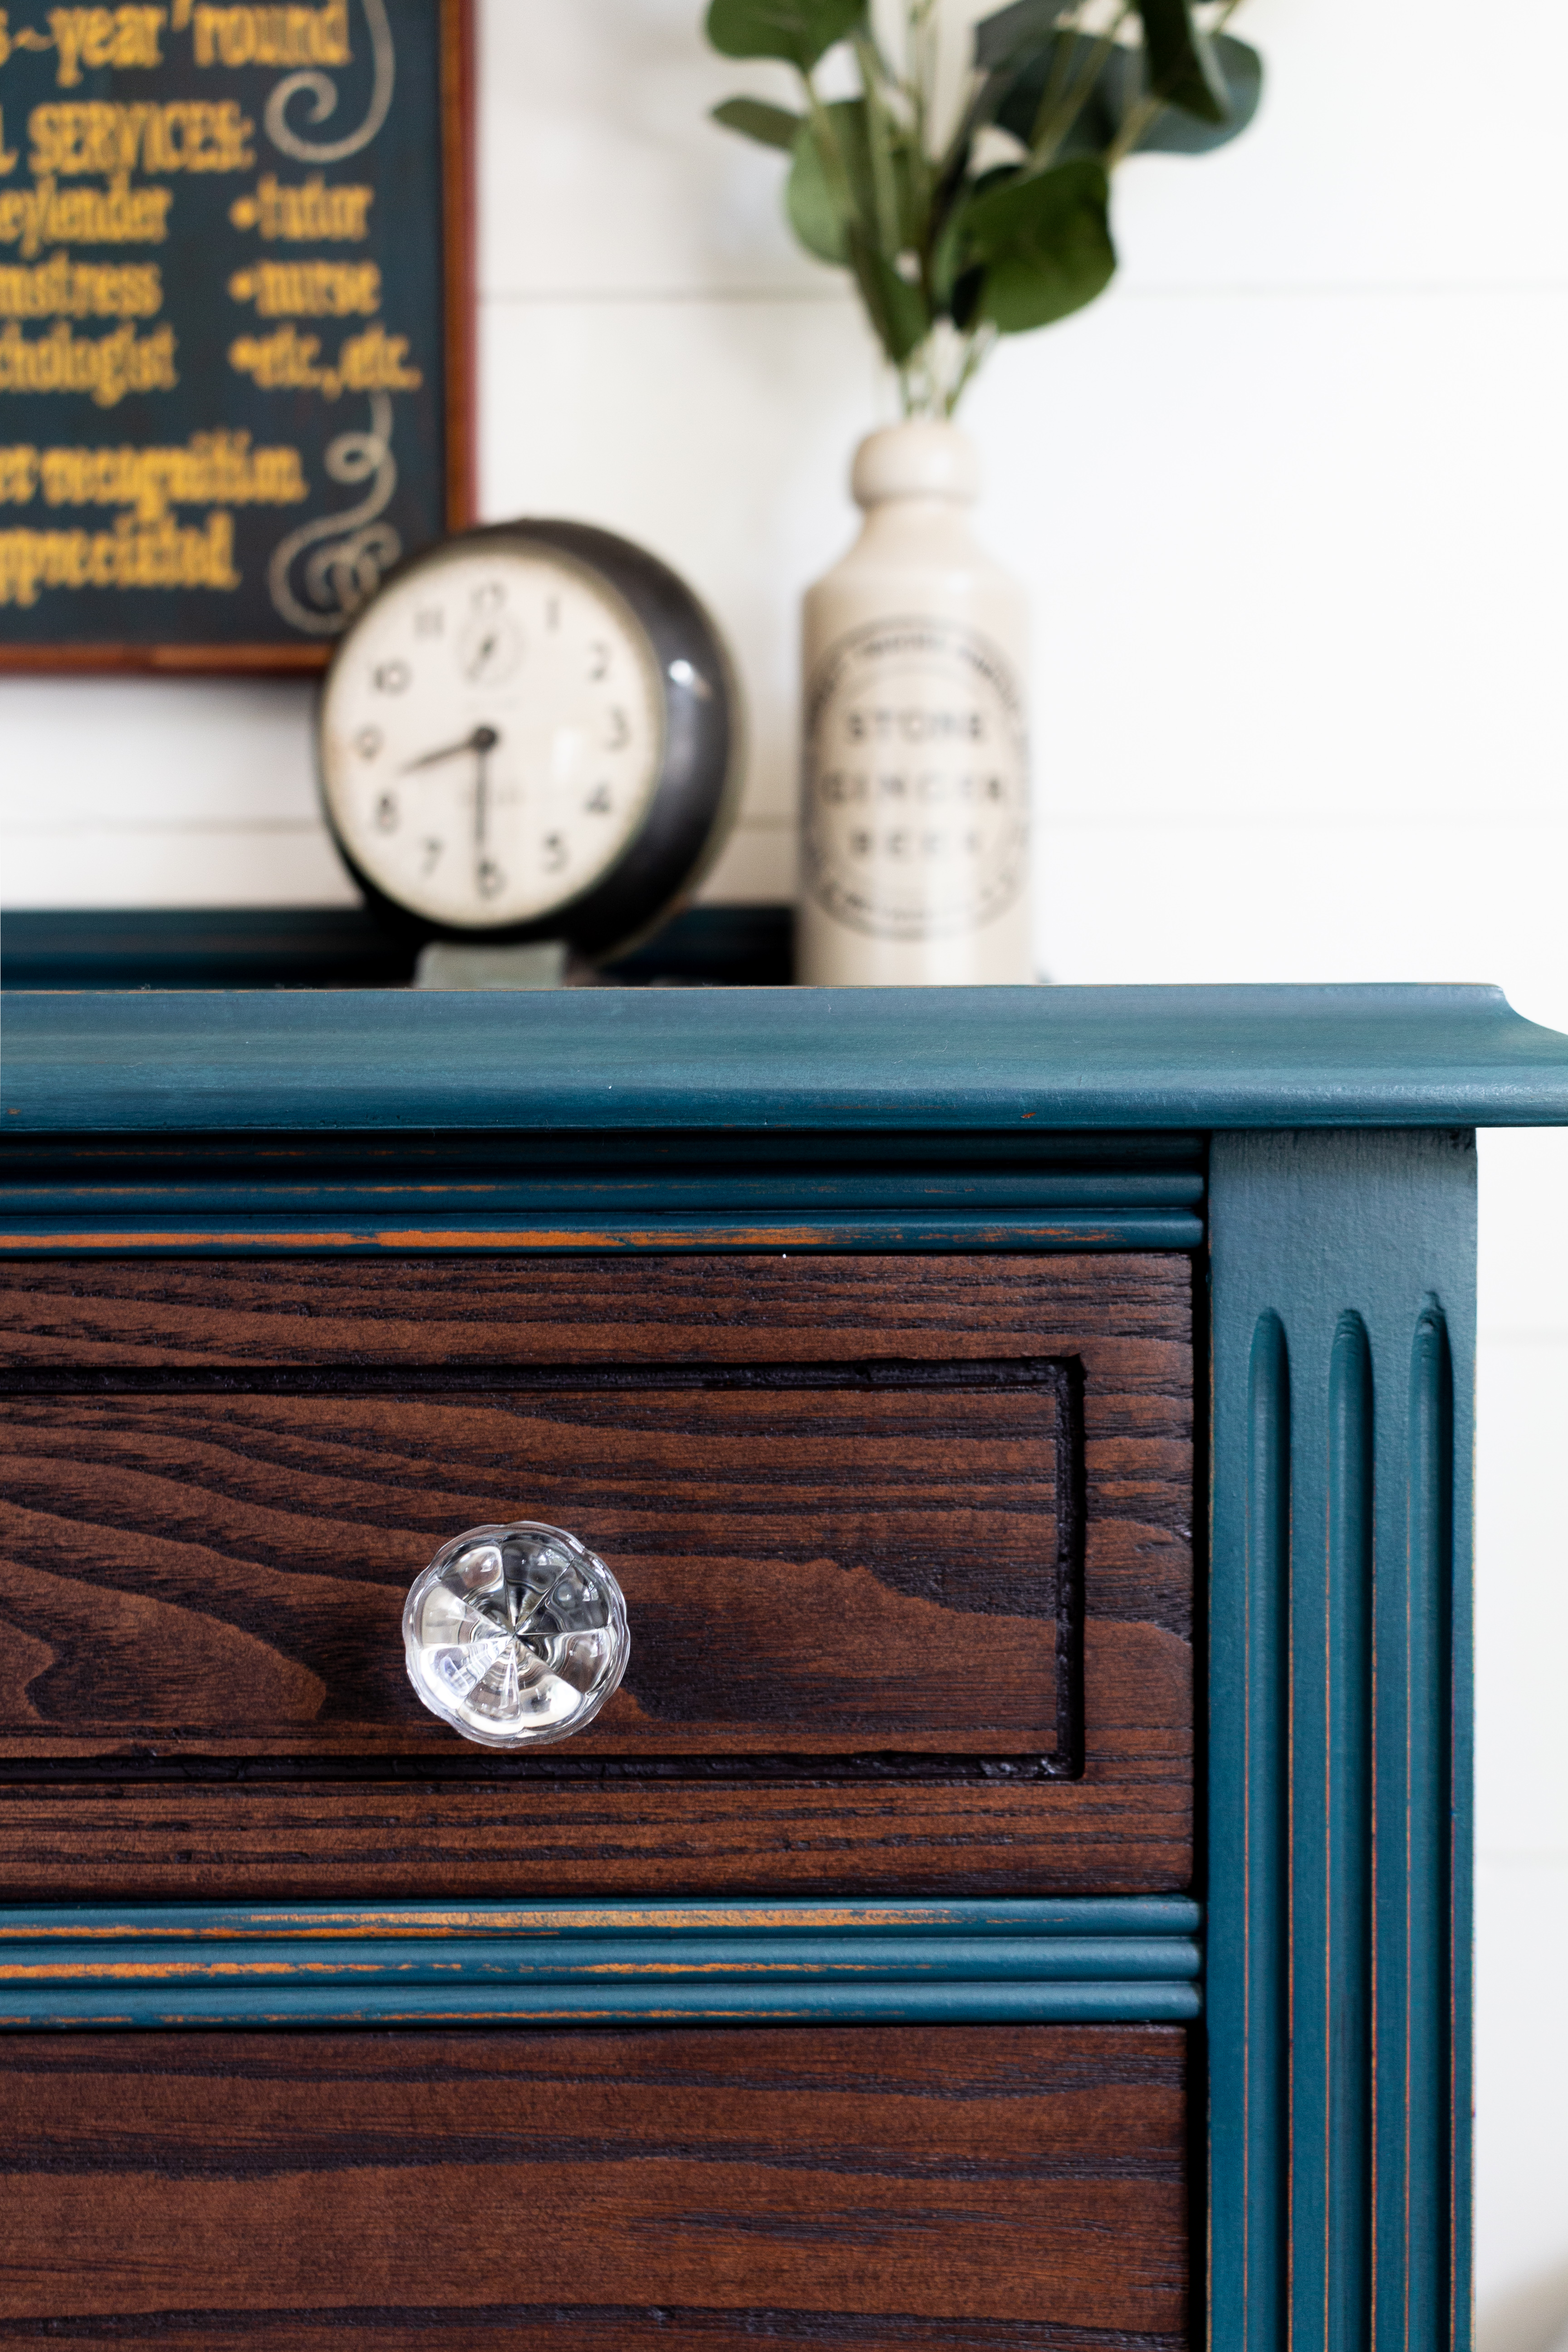 A “Weekend” Dresser in color & time…